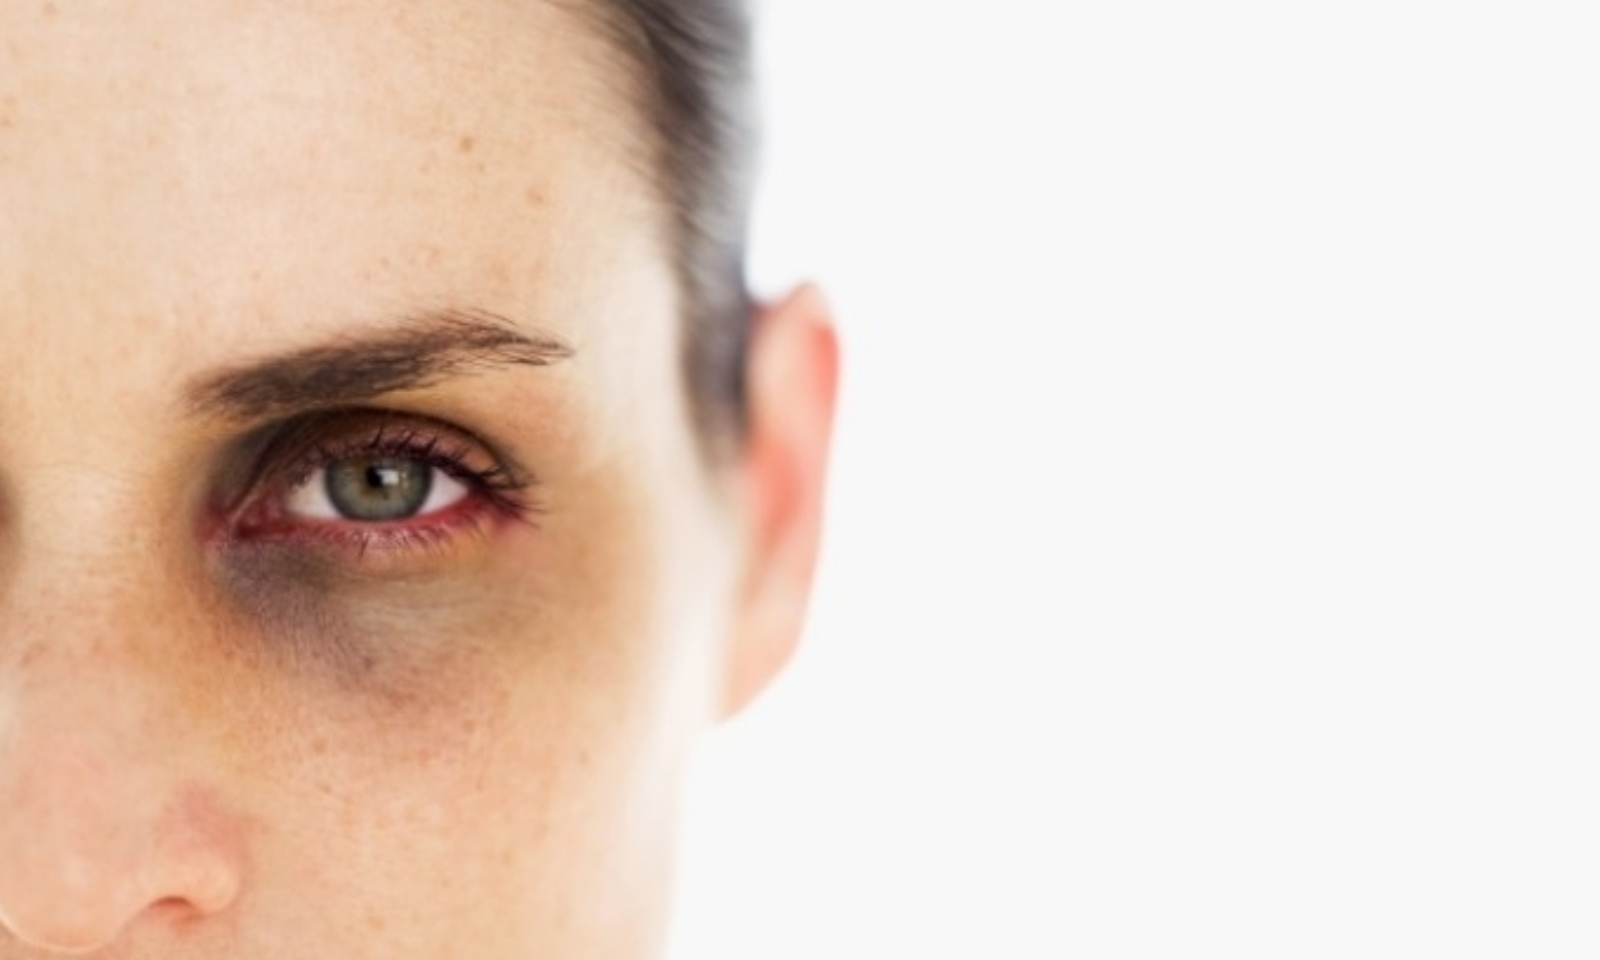 10 Most Effective Tips to Get Rid of Dark Circles